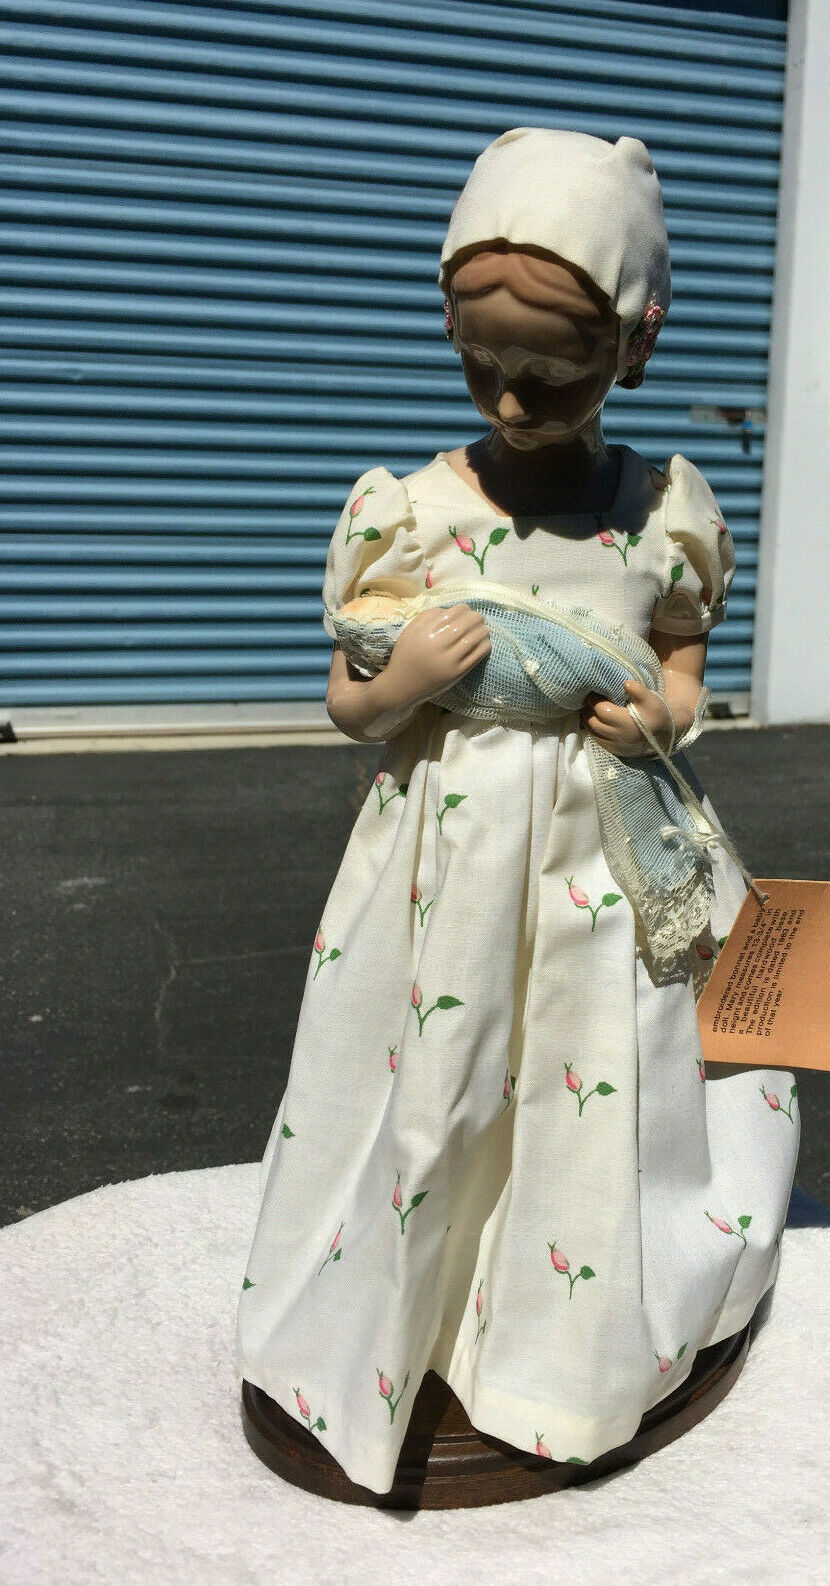 B & G Bing & Grondahl Denmark Porcelain Mary Doll of the Year First Edition 1983 - $299.00